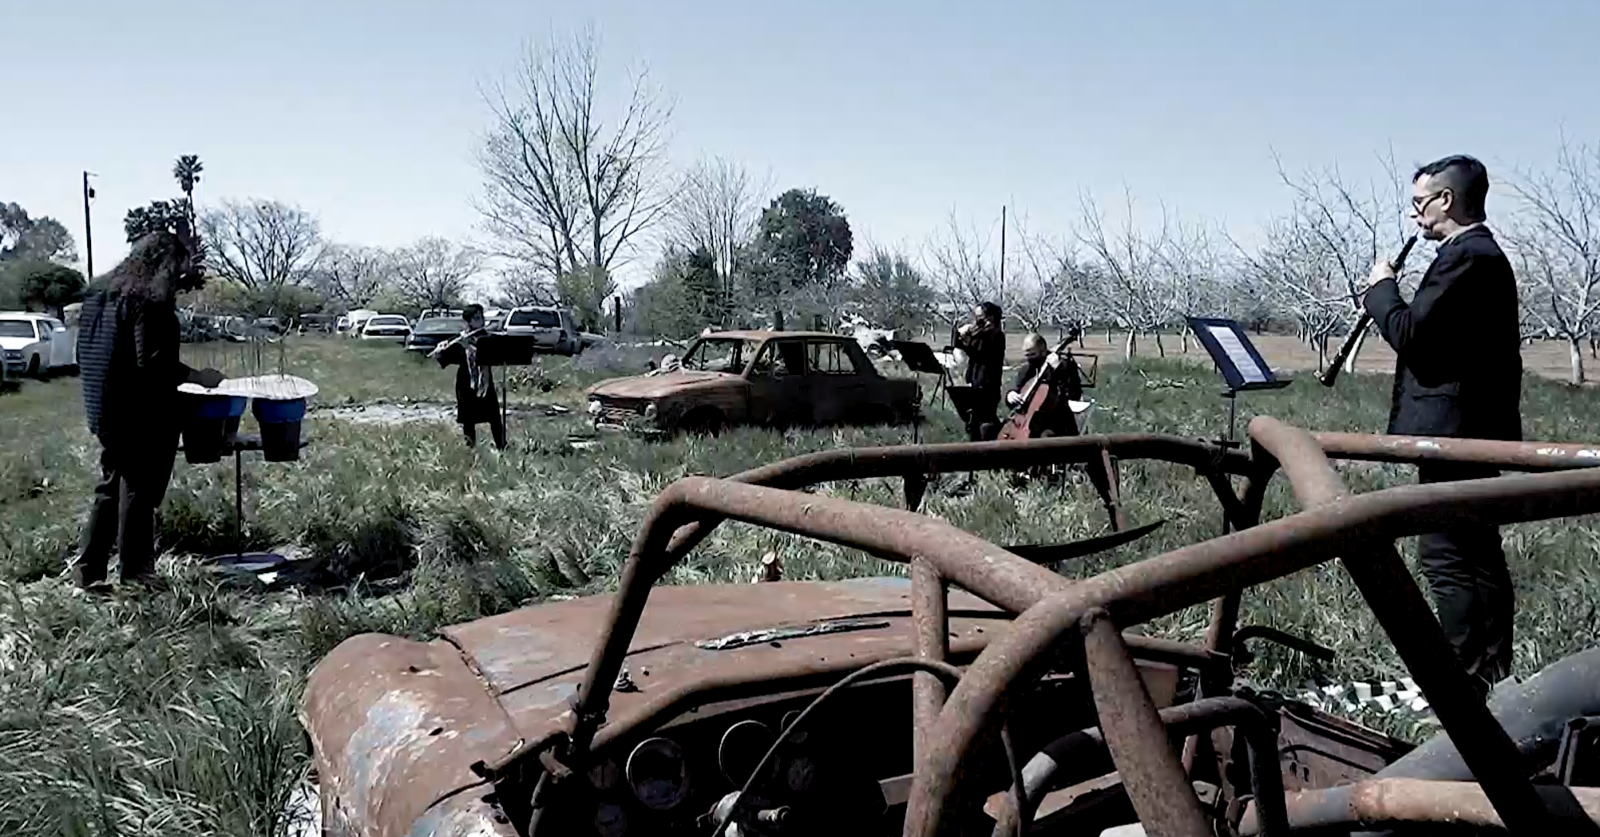 A grassy field with cars parked in the background. Five figures in all black stand apart from each other playing various instruments. The rusted chasses of old cars are strewn throughout the grass.